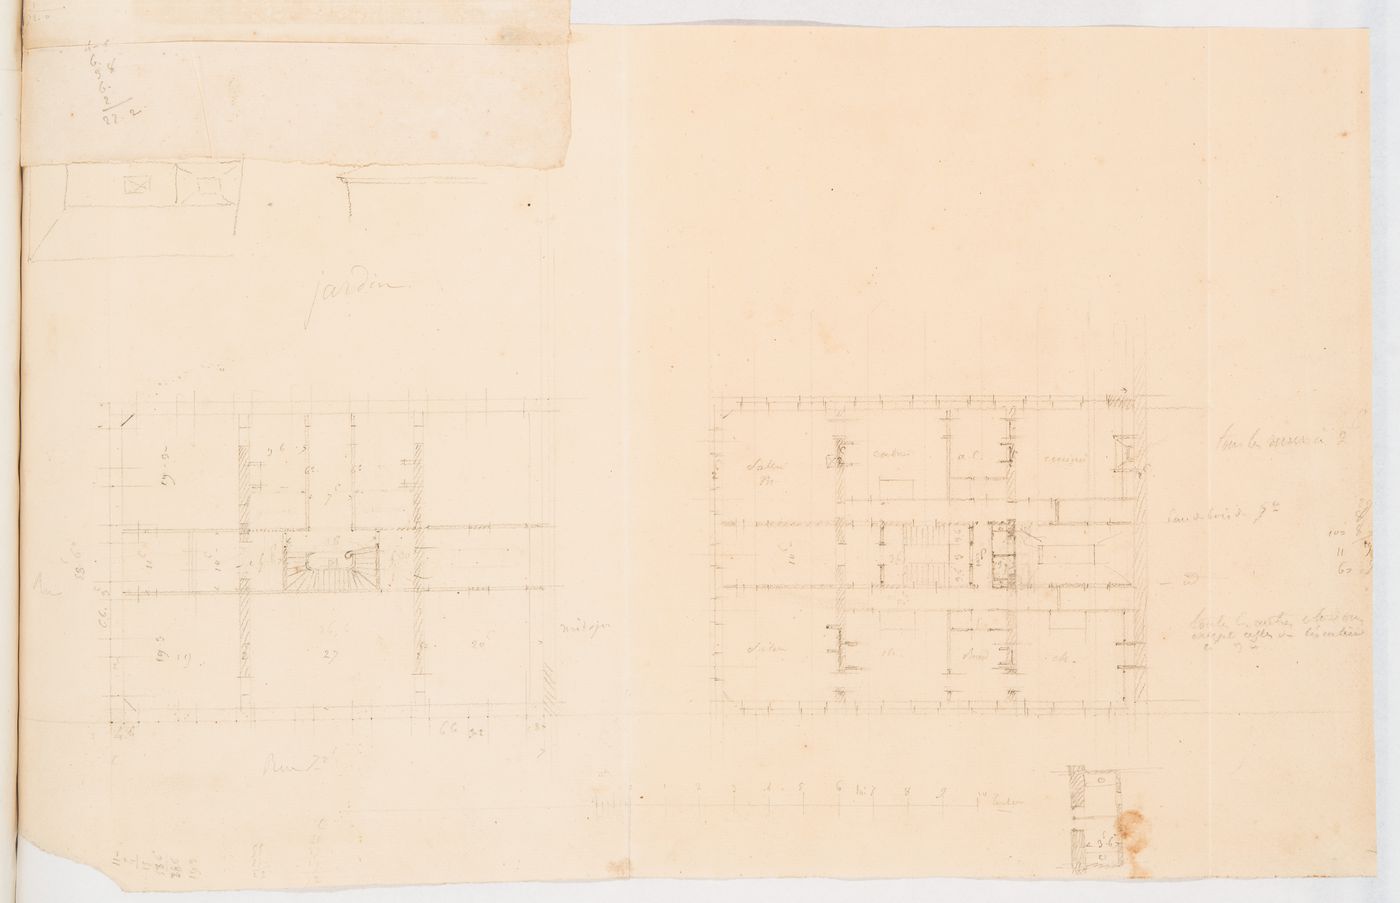 Sketch plans, possibly for a hôtel for the de Lorgeril family in Rennes